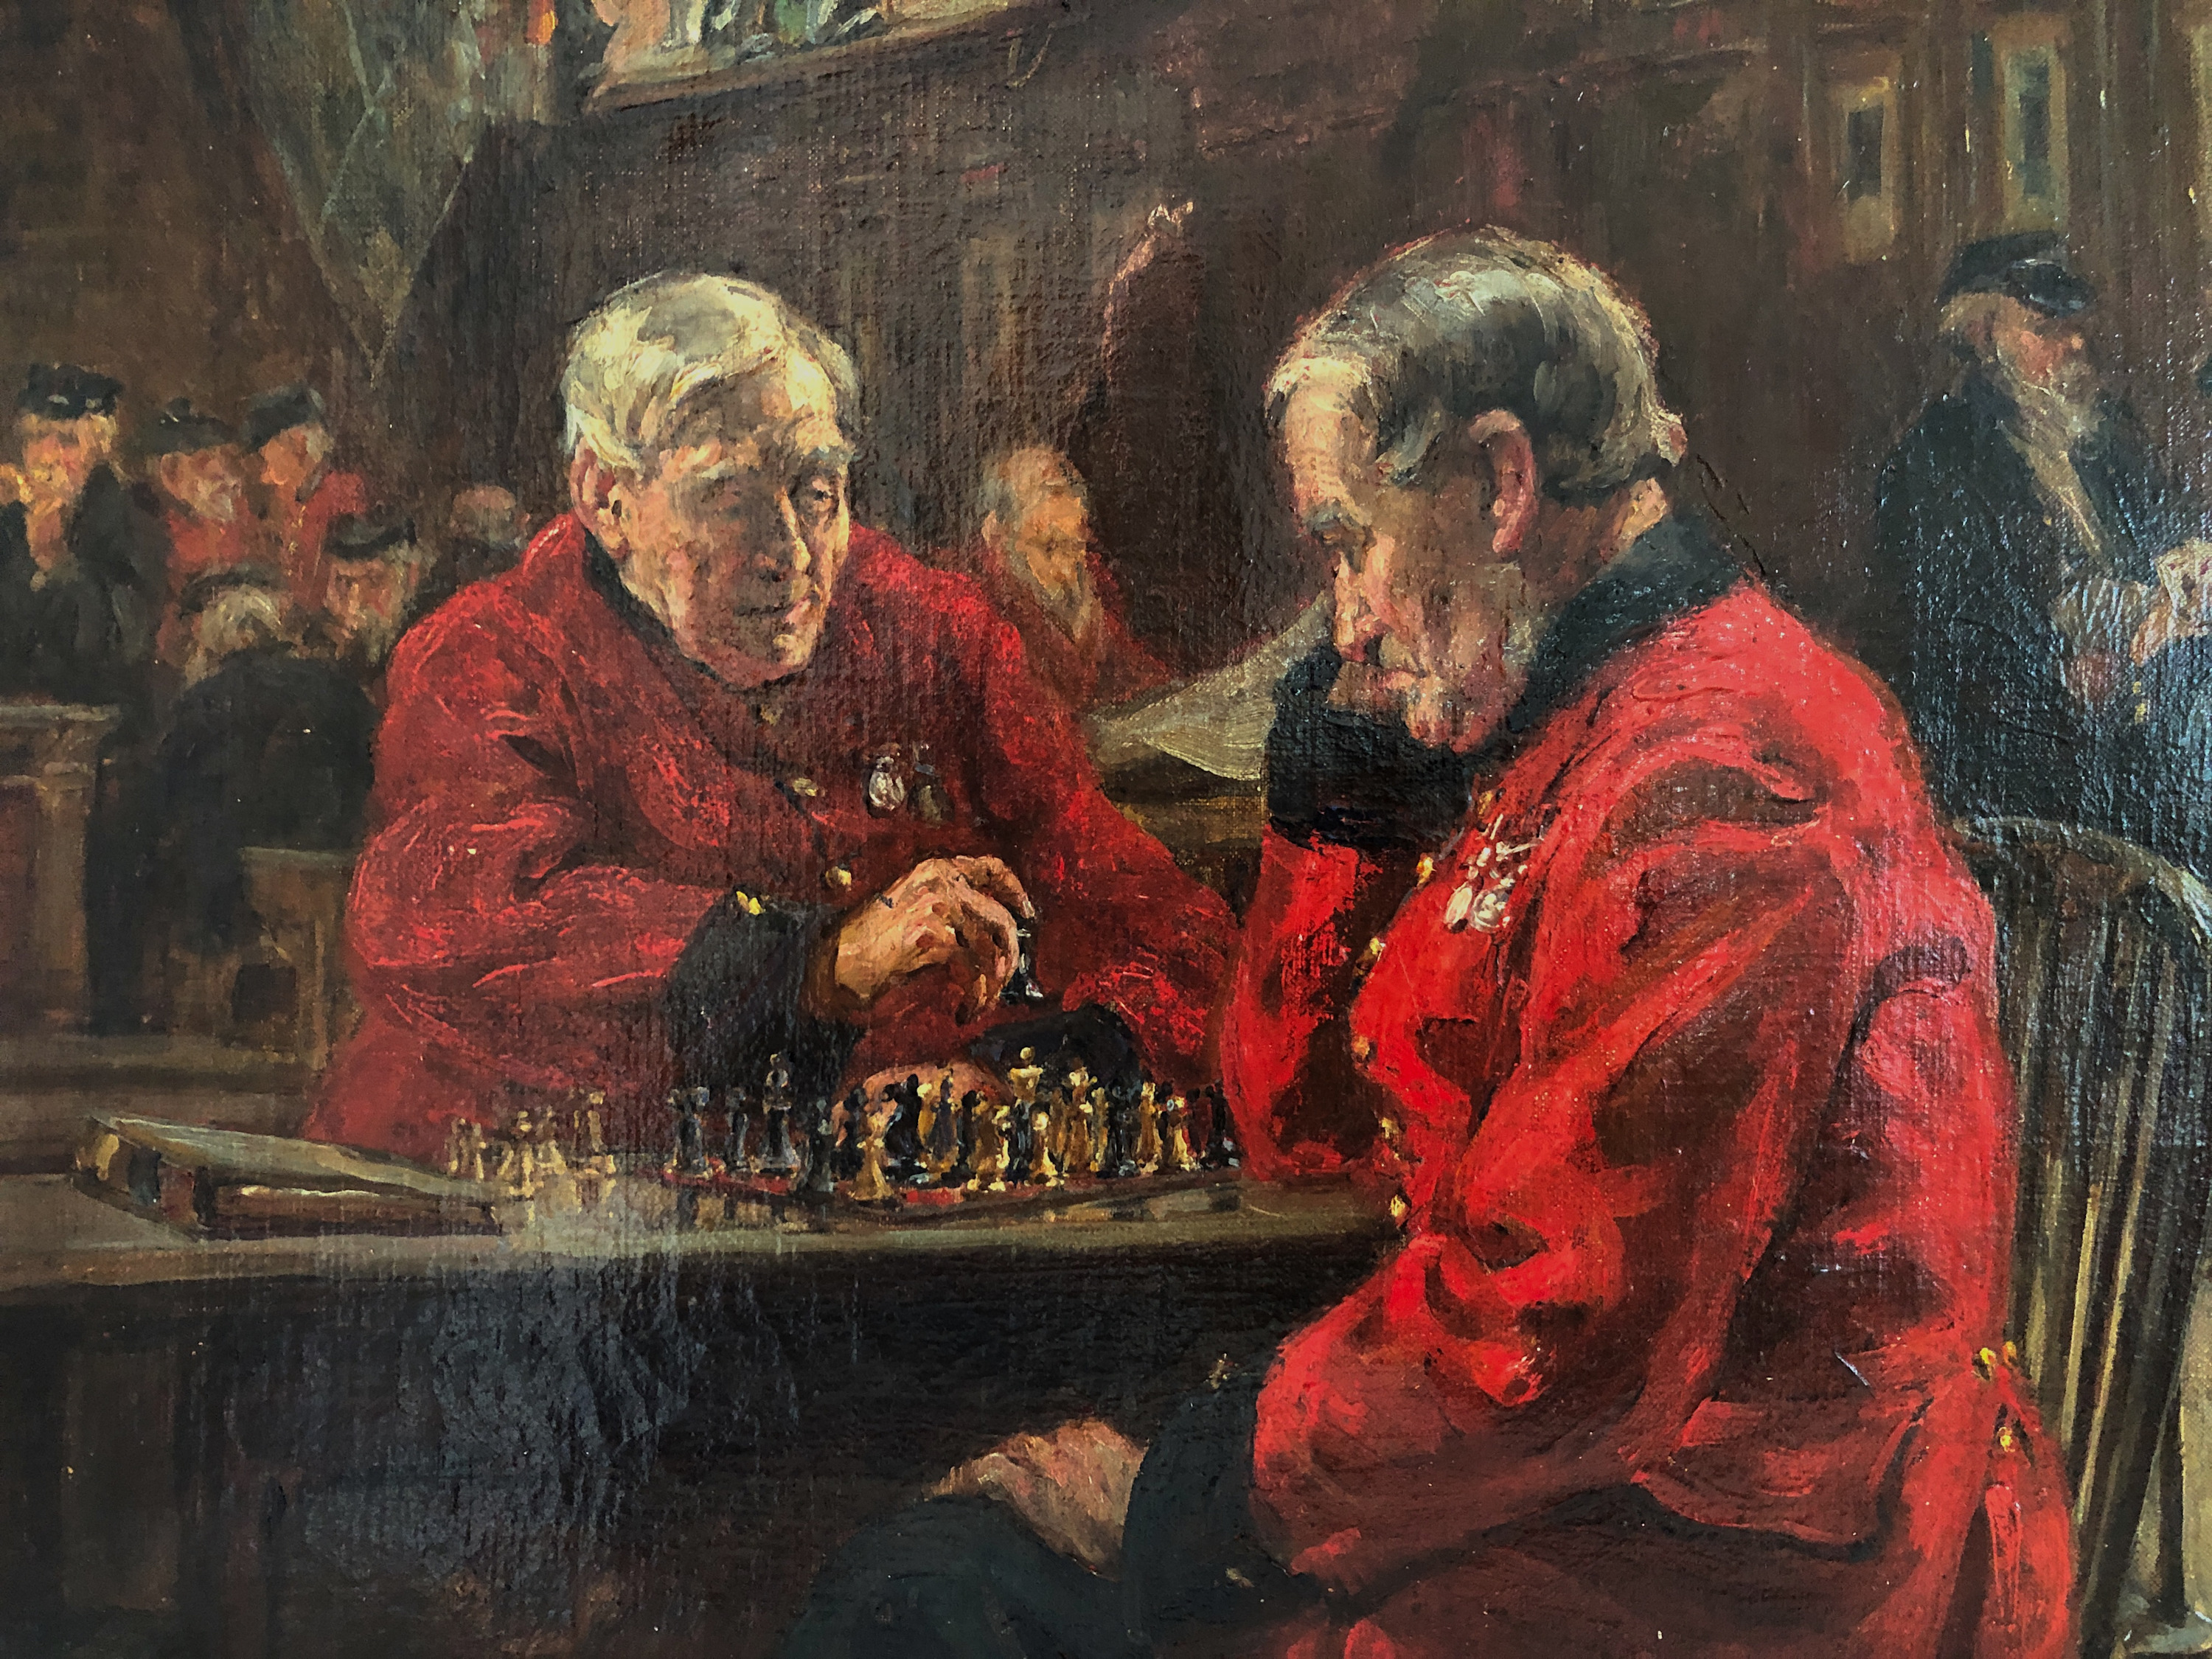 Chess painting17 simone maher kwrtac